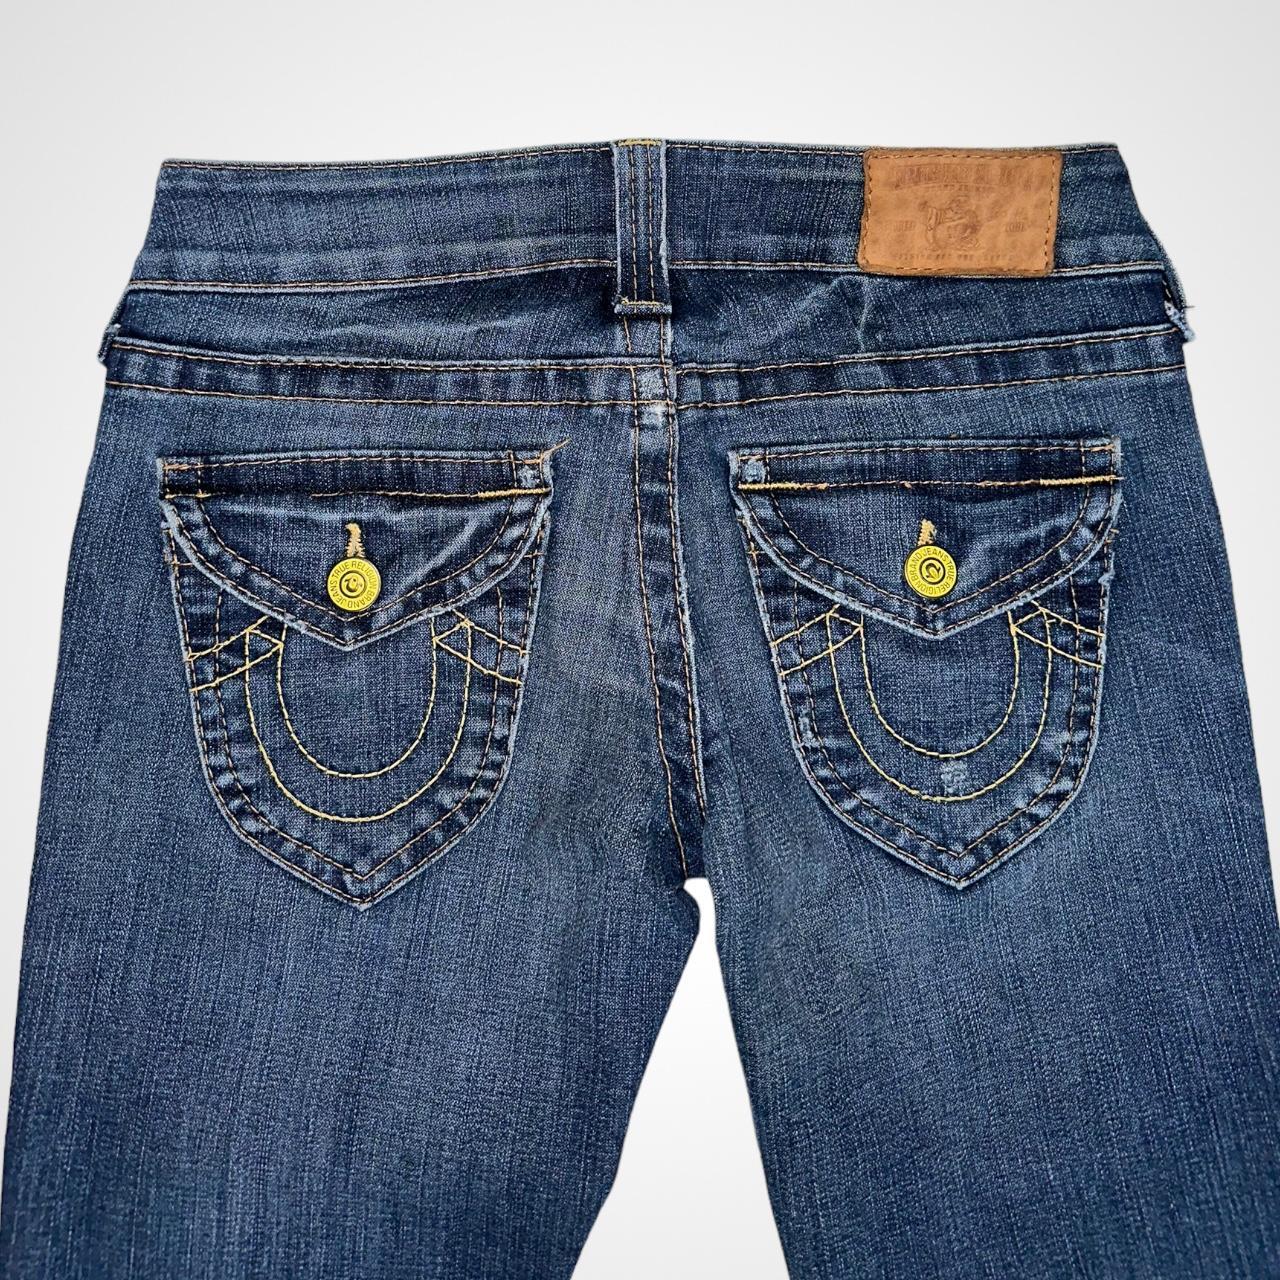 Y2K True religion Bobby flare jeans womens 31x30.5 low rise dark wash USA  Made